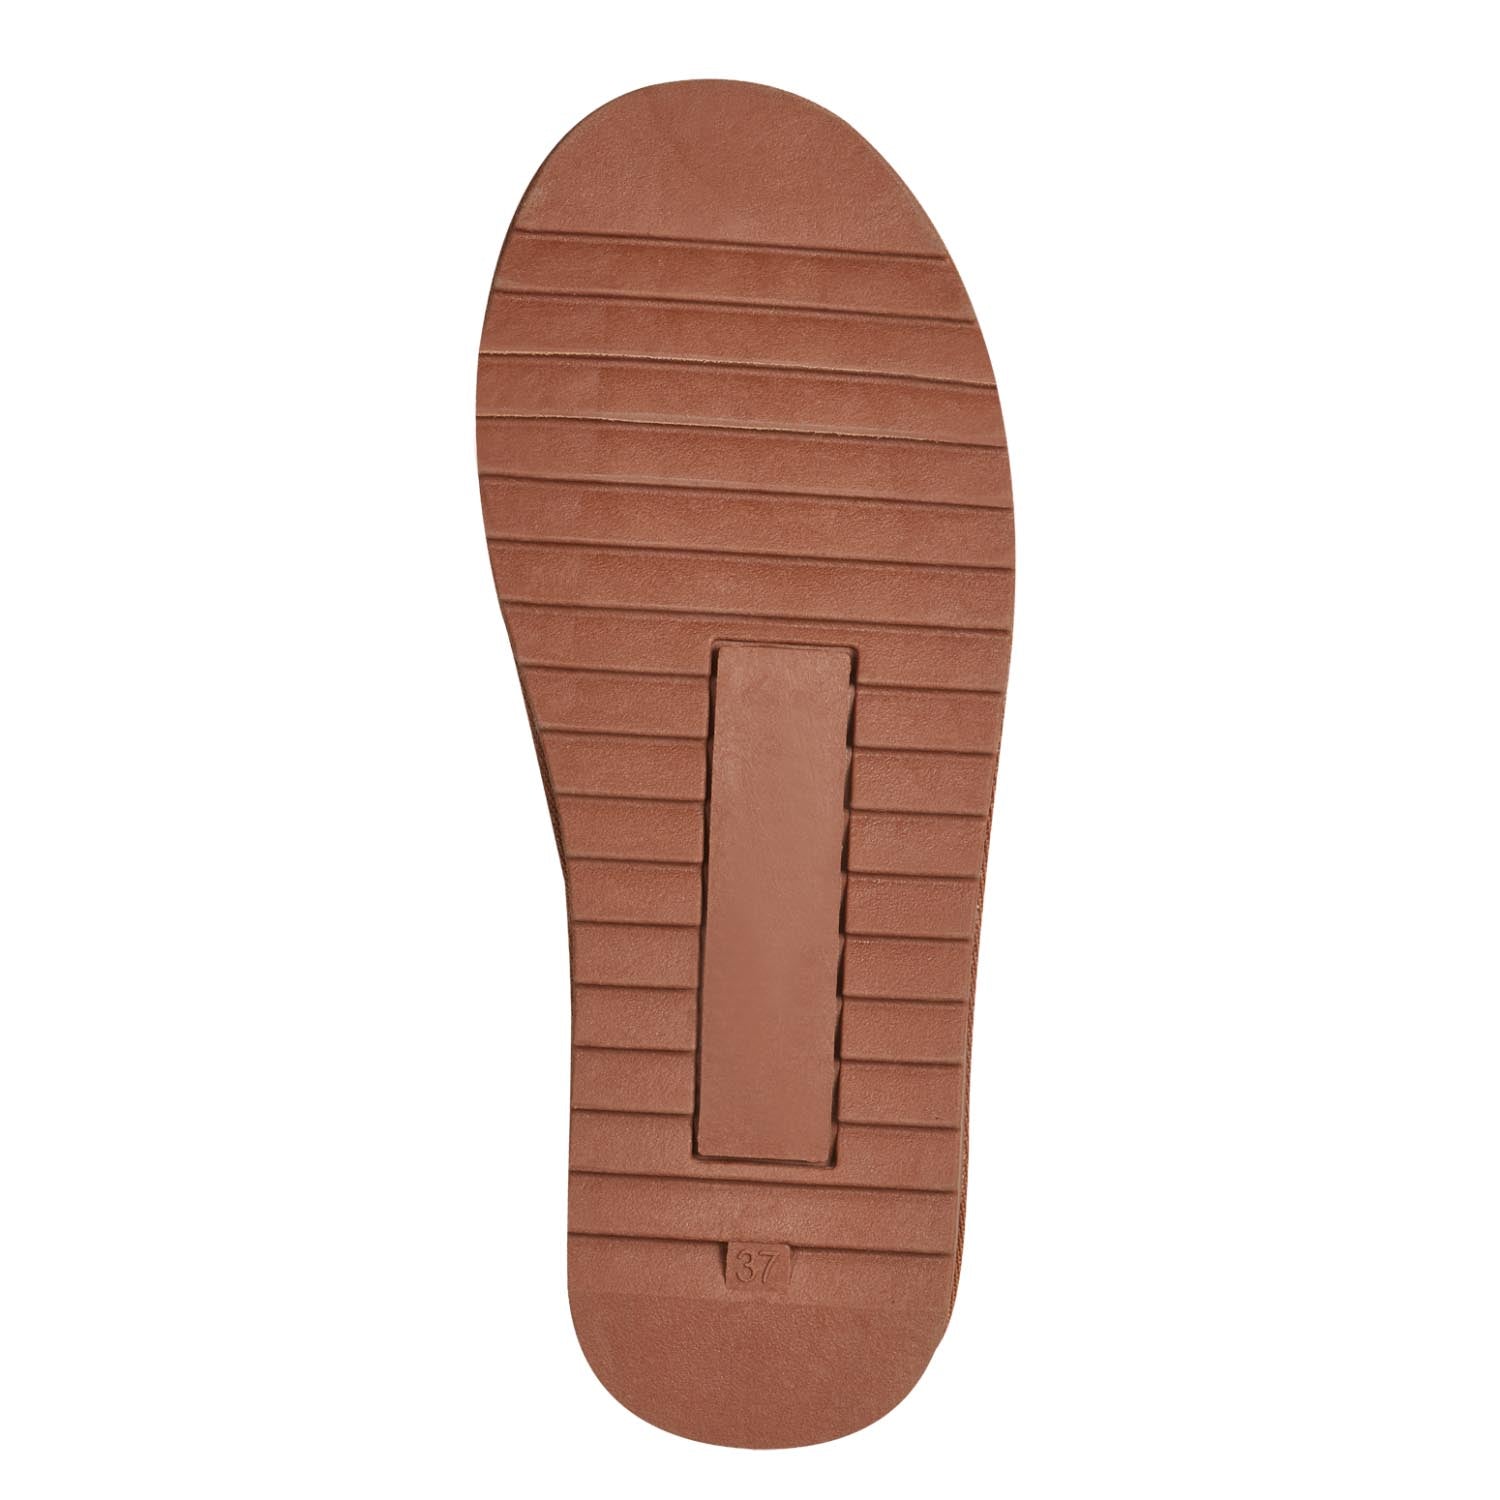 Detailed shot of the flat sole.